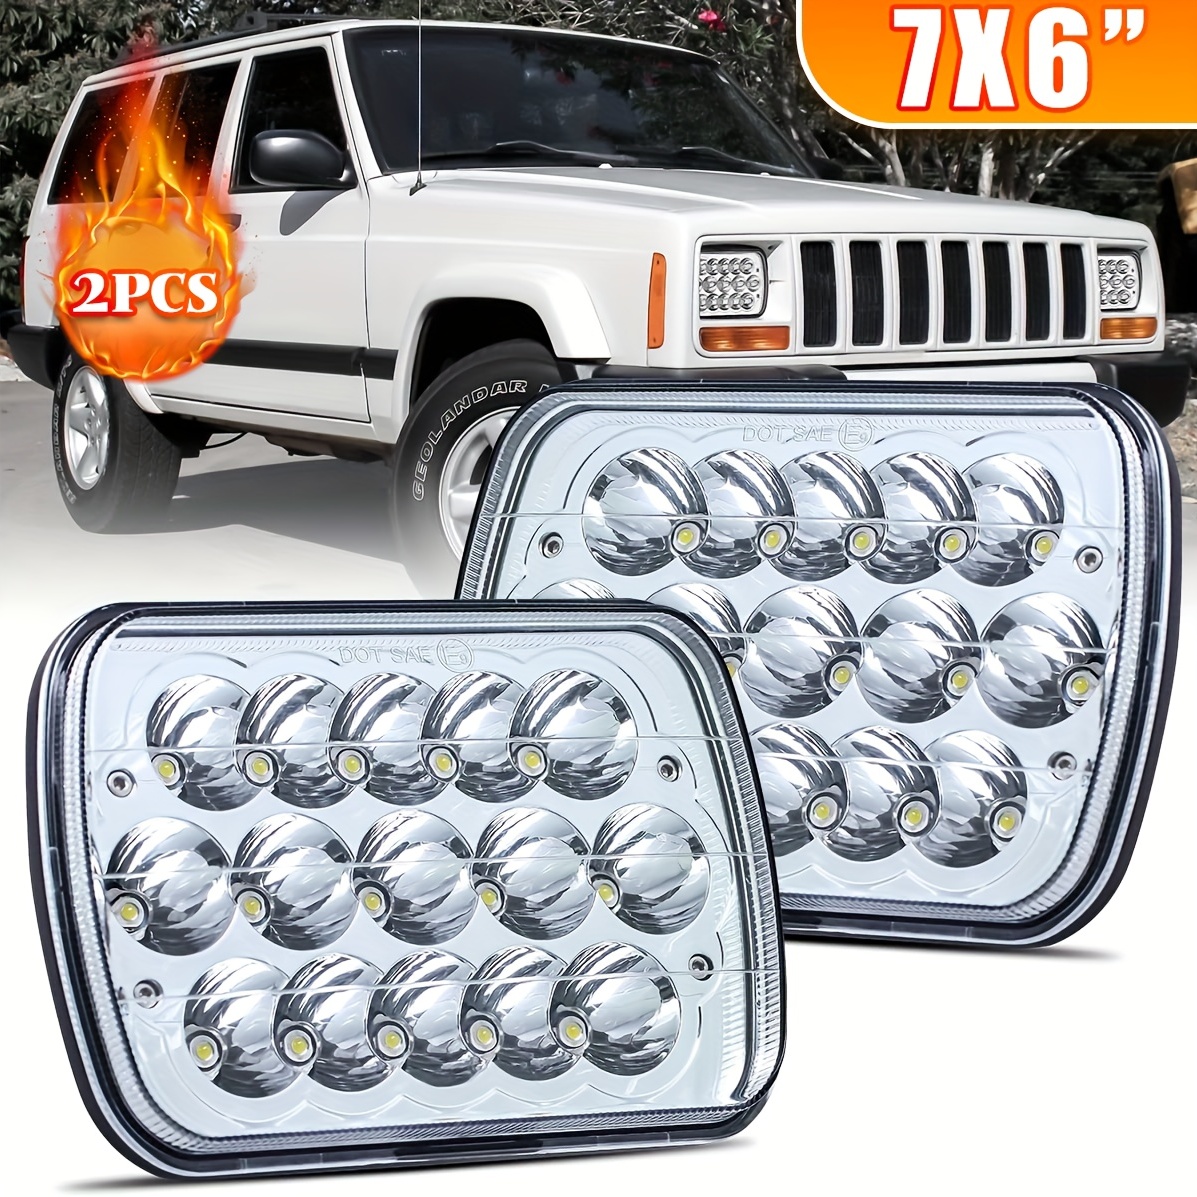 5x7In LED Headlights H6054 7x6 Headlamp 2pcs Hi/Low Sealed Beam Headlight  For Je Ep Offroad Truck * Ford With H6014 H6052 6054 H5054 H6054LL